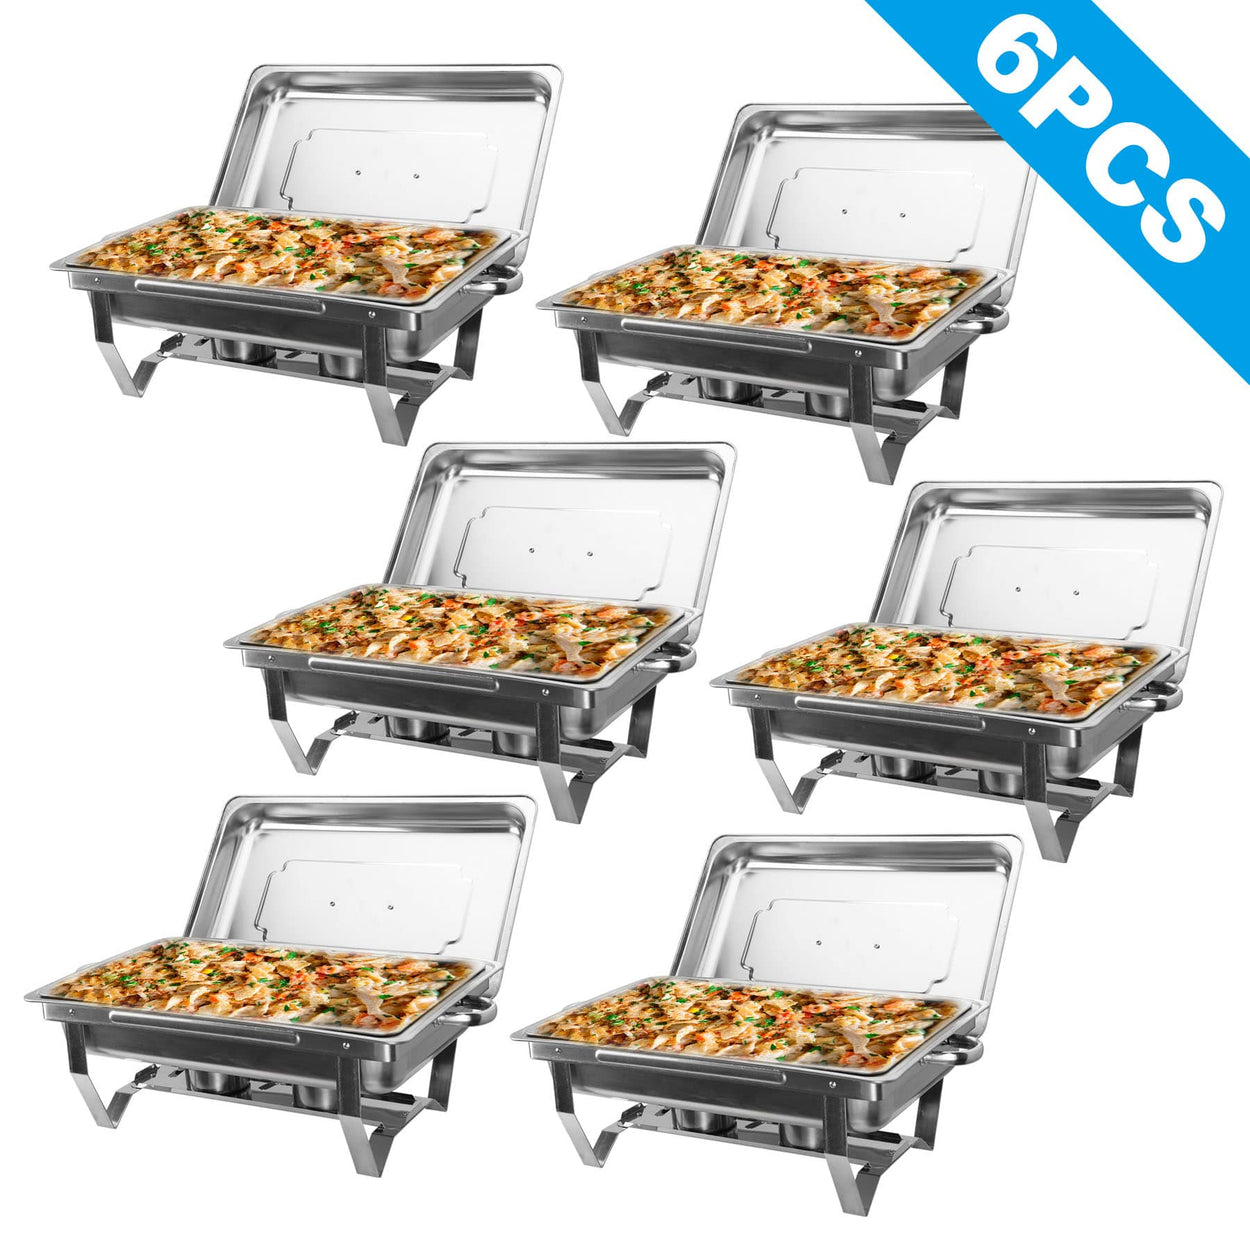 Chafer-Chafing-Dish-Sets-9L8Q-2Pack-Stainless-Steel